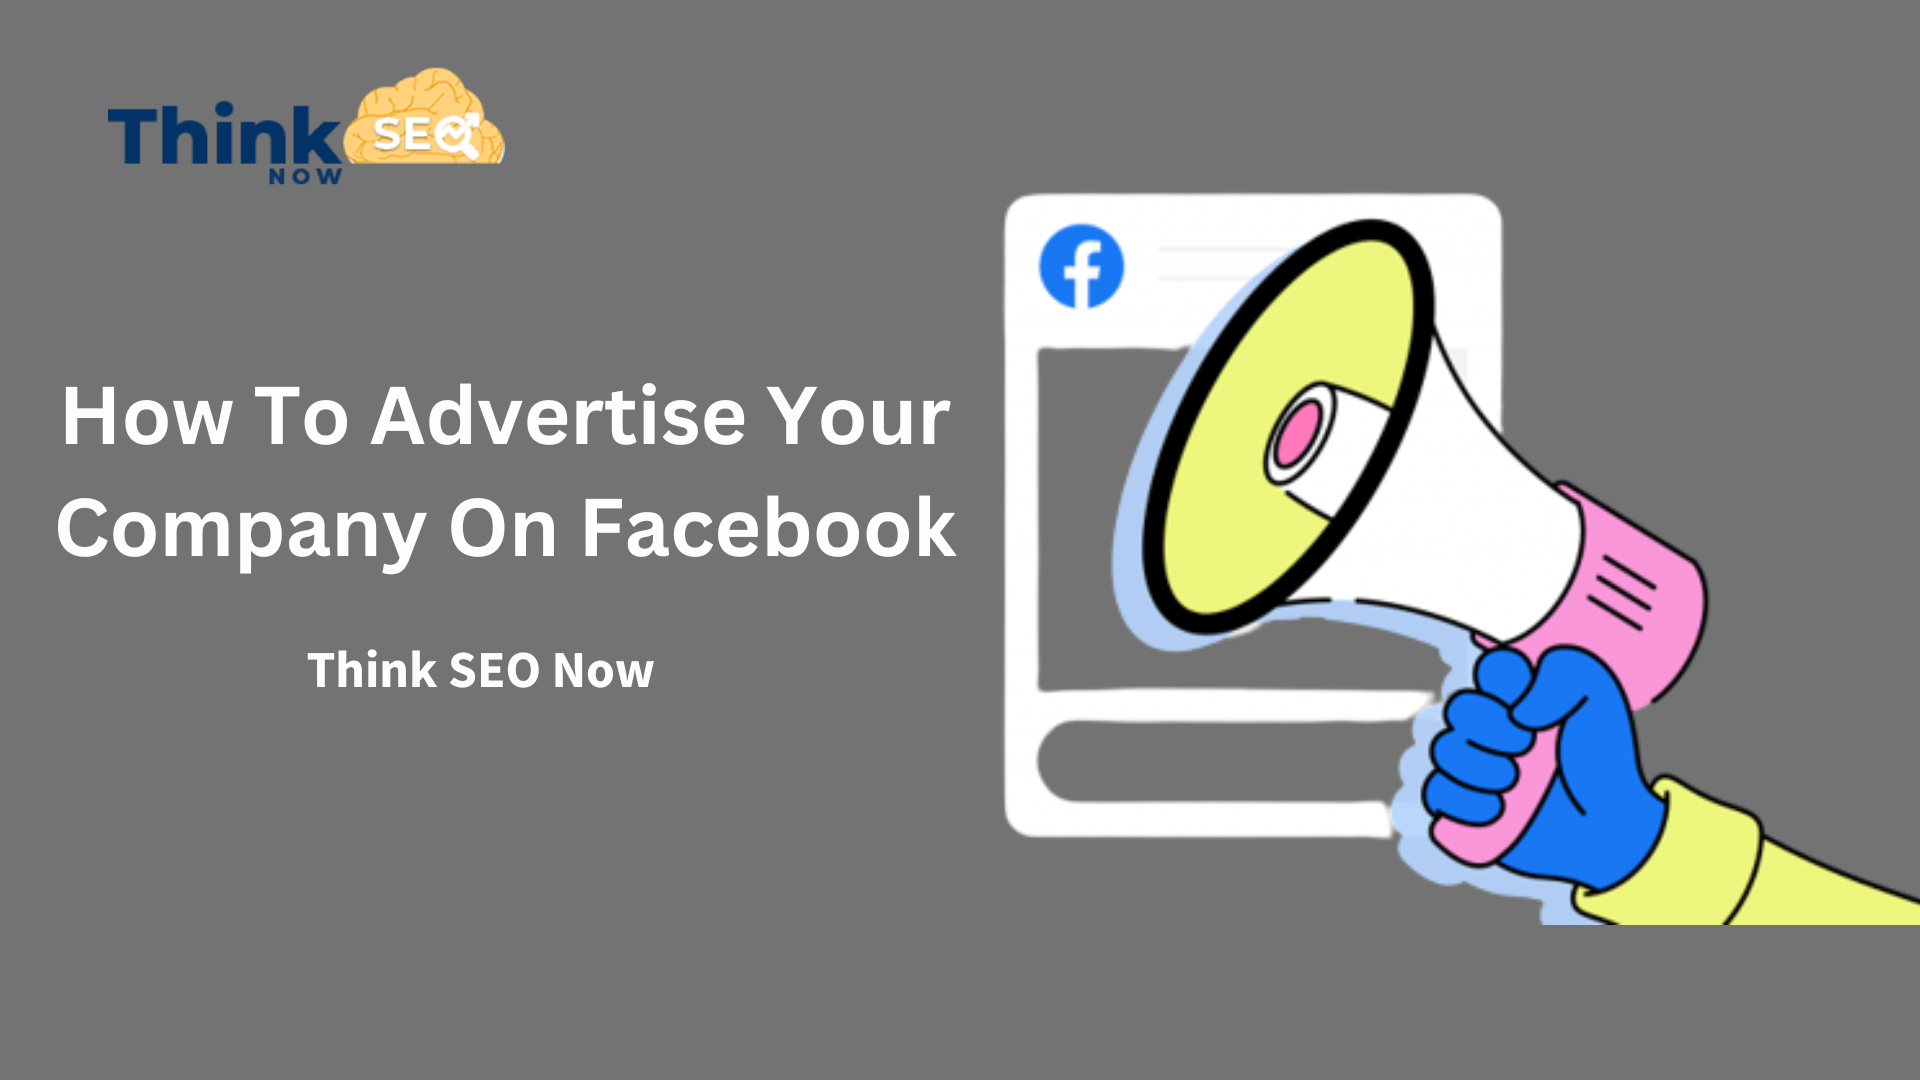 How To Advertise Your Company On Facebook